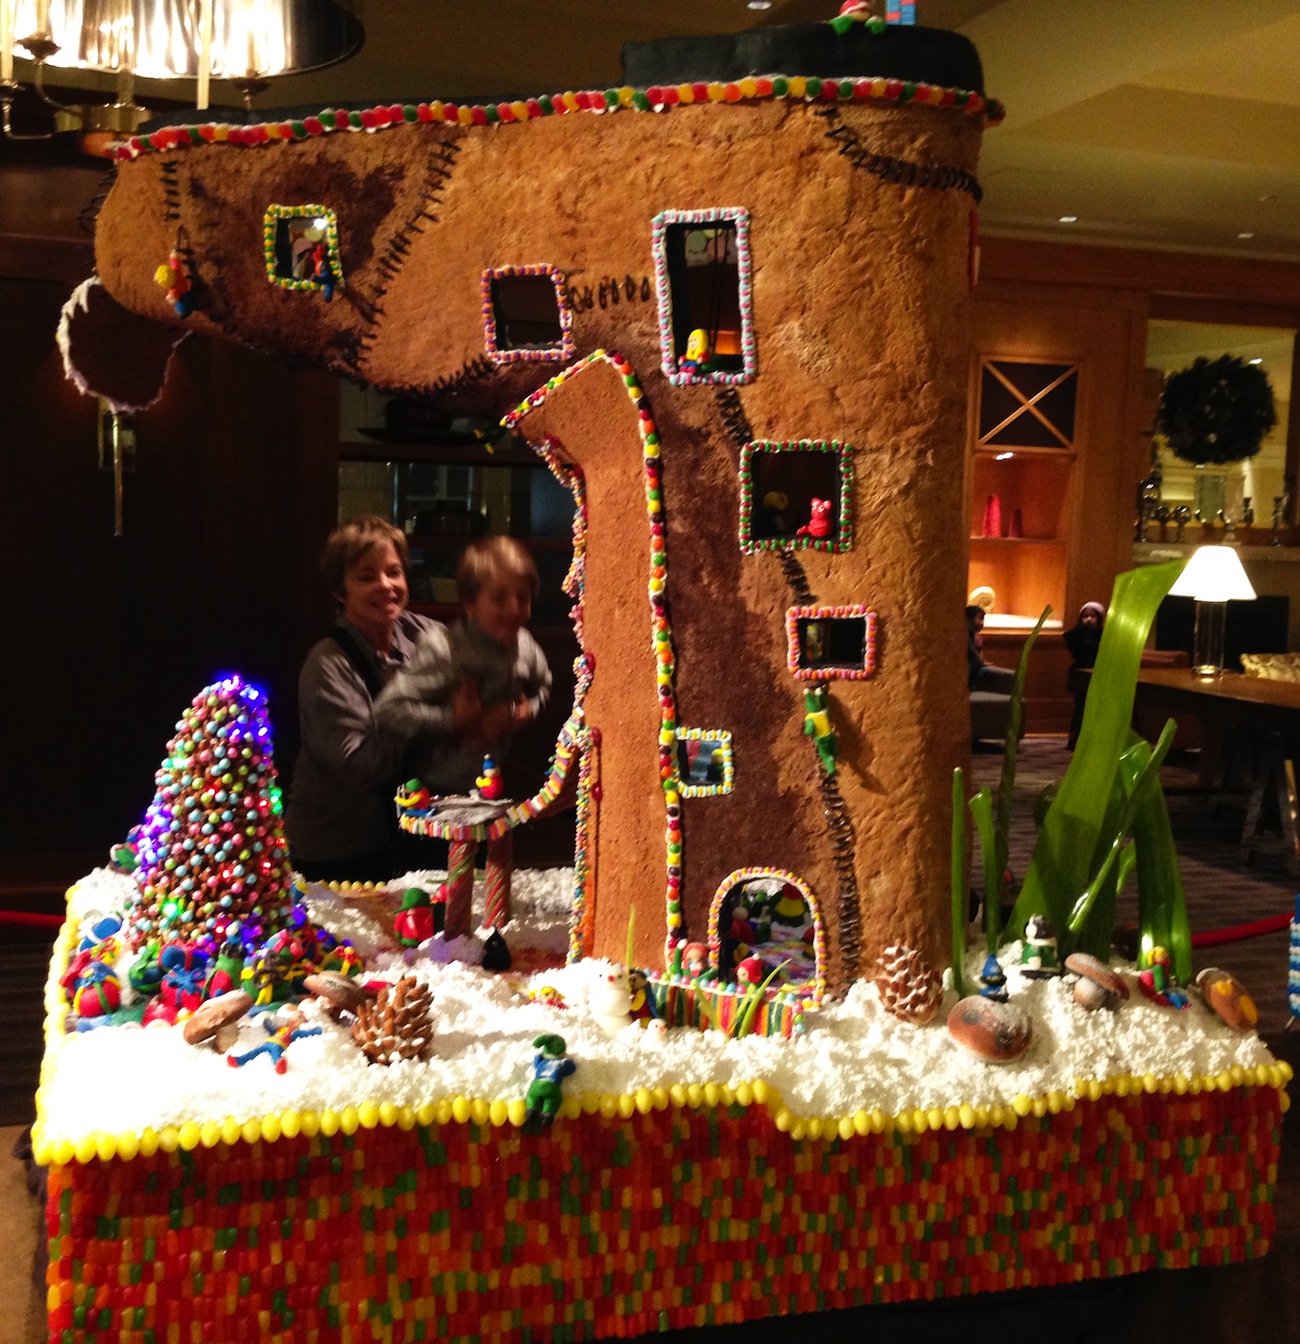 Seattle Gingerbread House There Was an Old Woman Who Lived in a Shoe